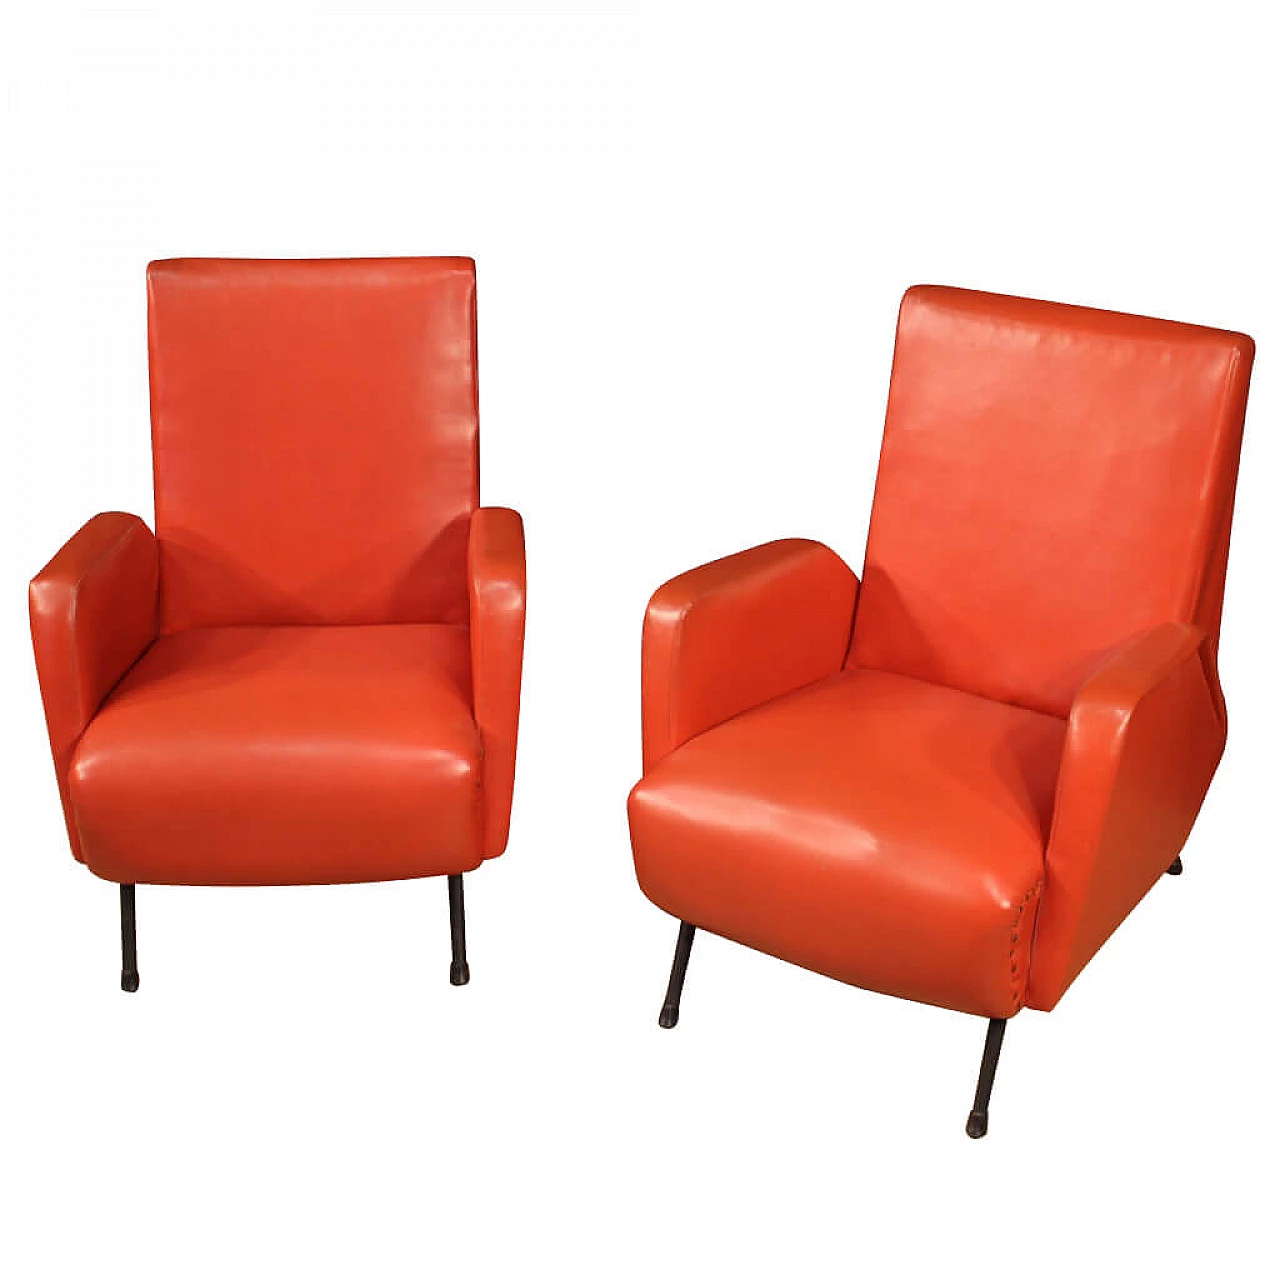 Pair of Italian designer armchairs in imitation red leather 1121043